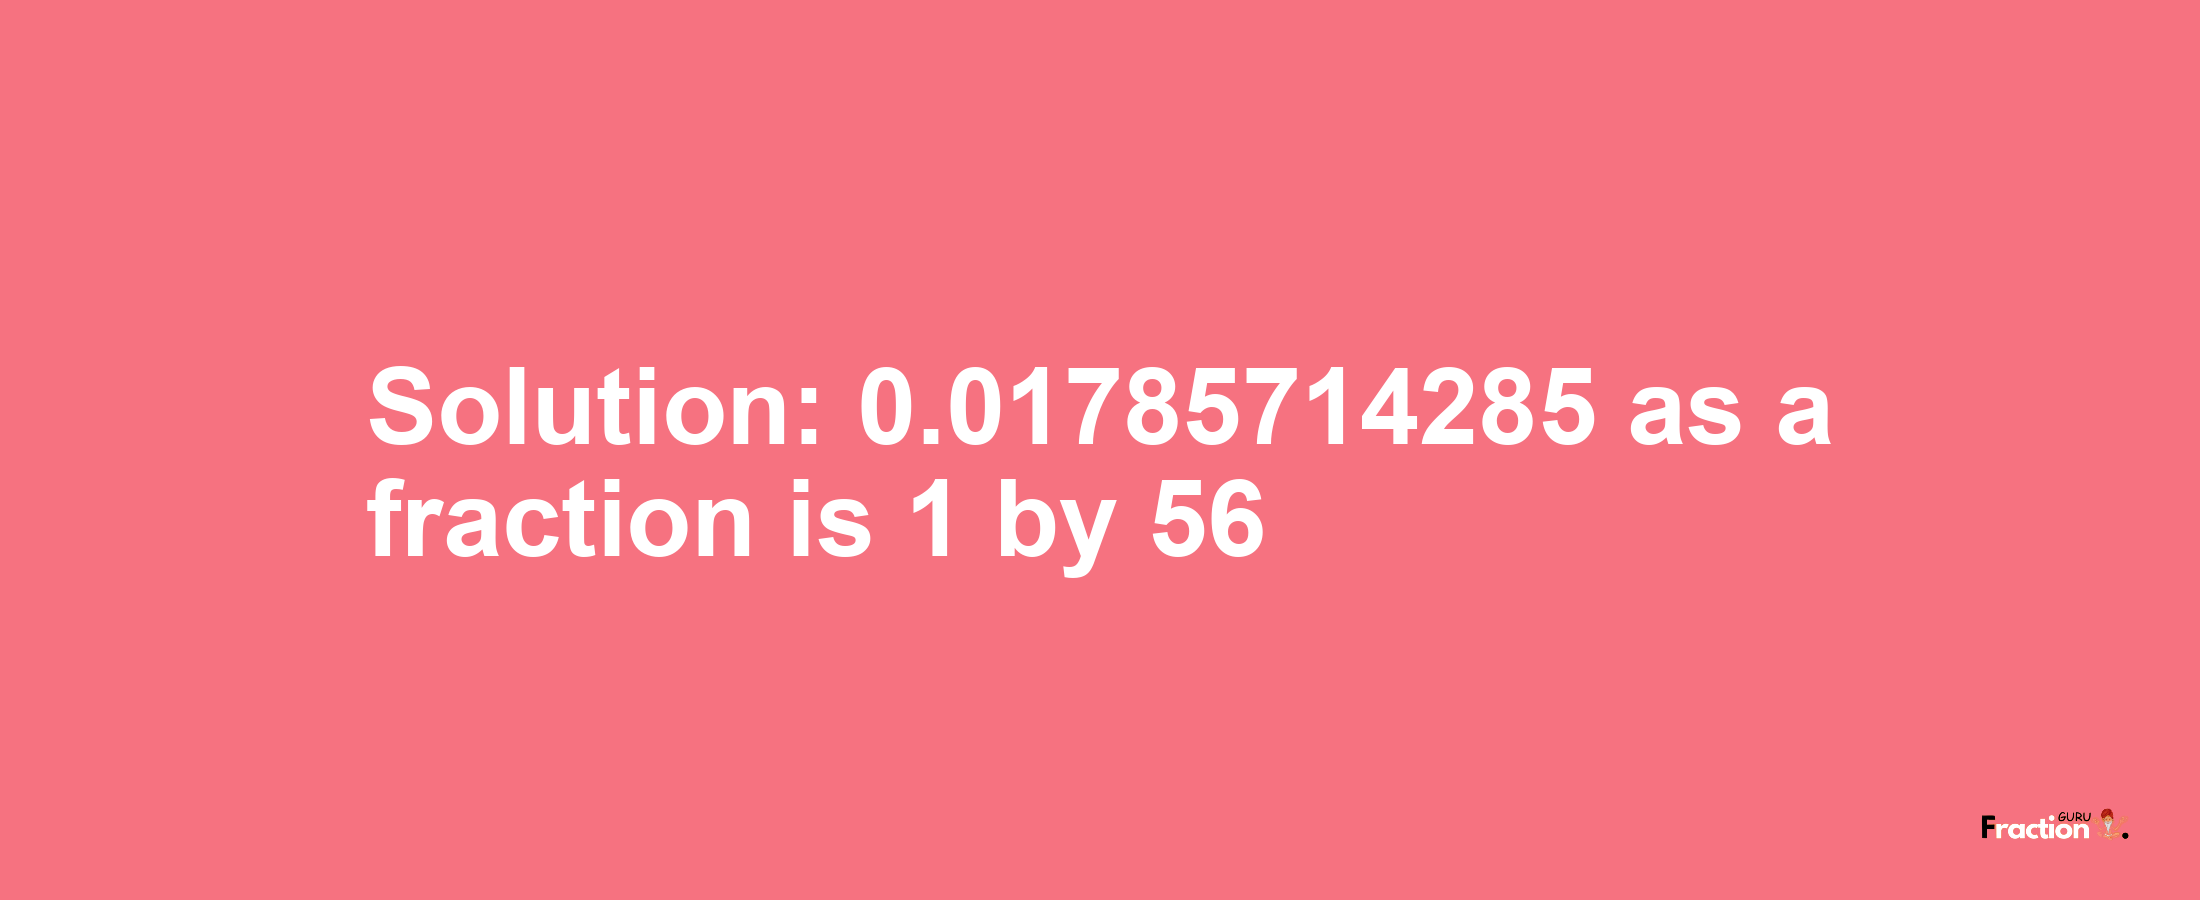 Solution:0.01785714285 as a fraction is 1/56